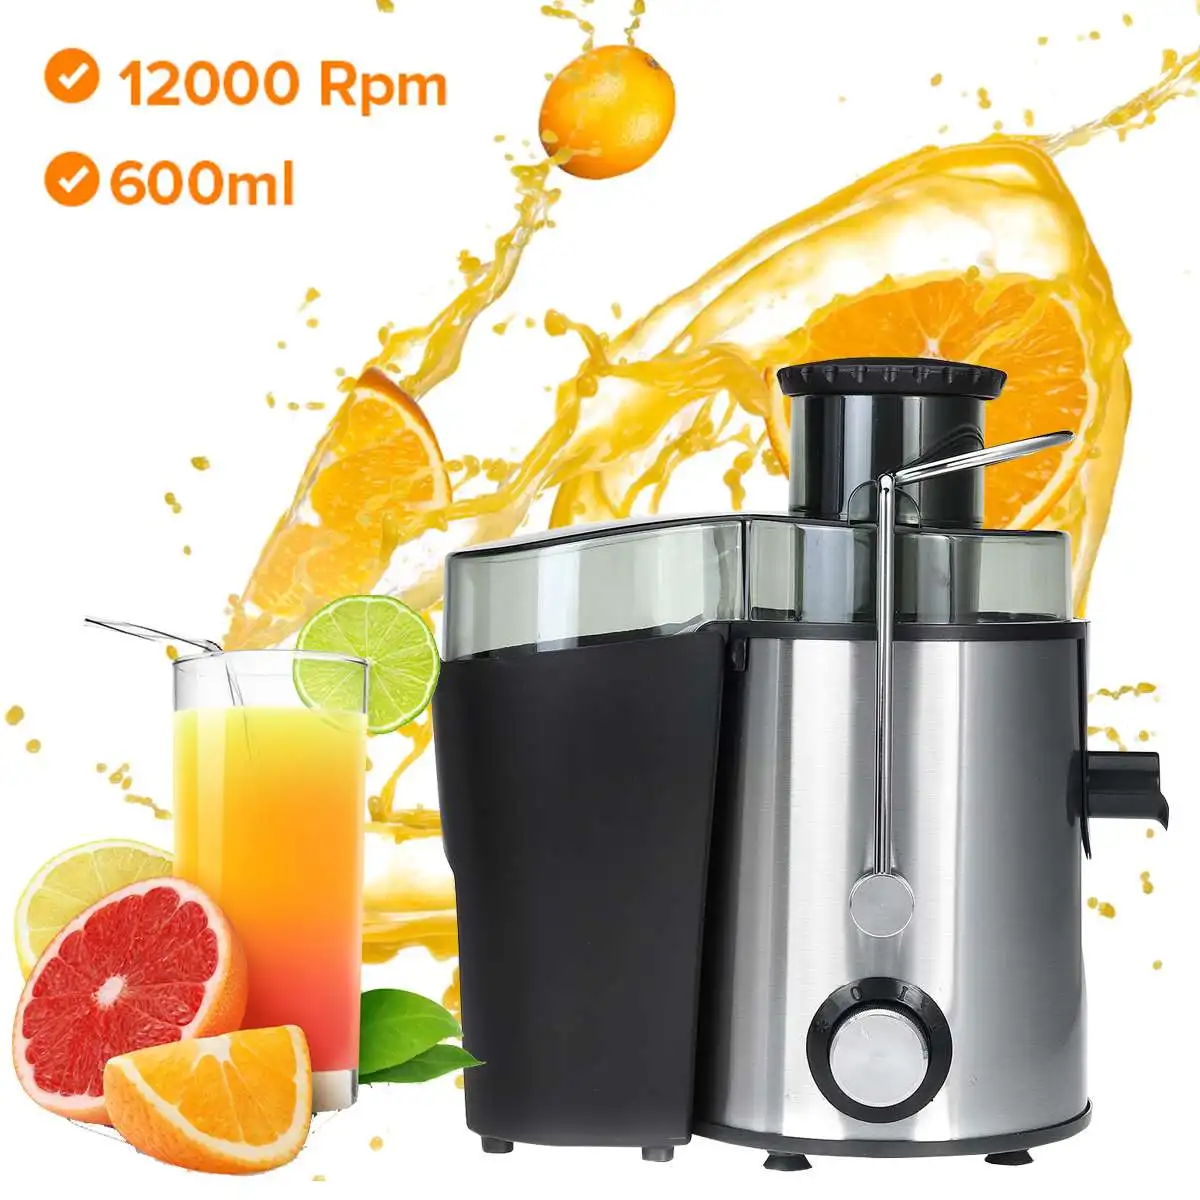 

1000W 2 Speed Stainless Steel Juicers Electric Juice Extractor Household Fruit Vegetables Drinking Machine for Home Kitchen